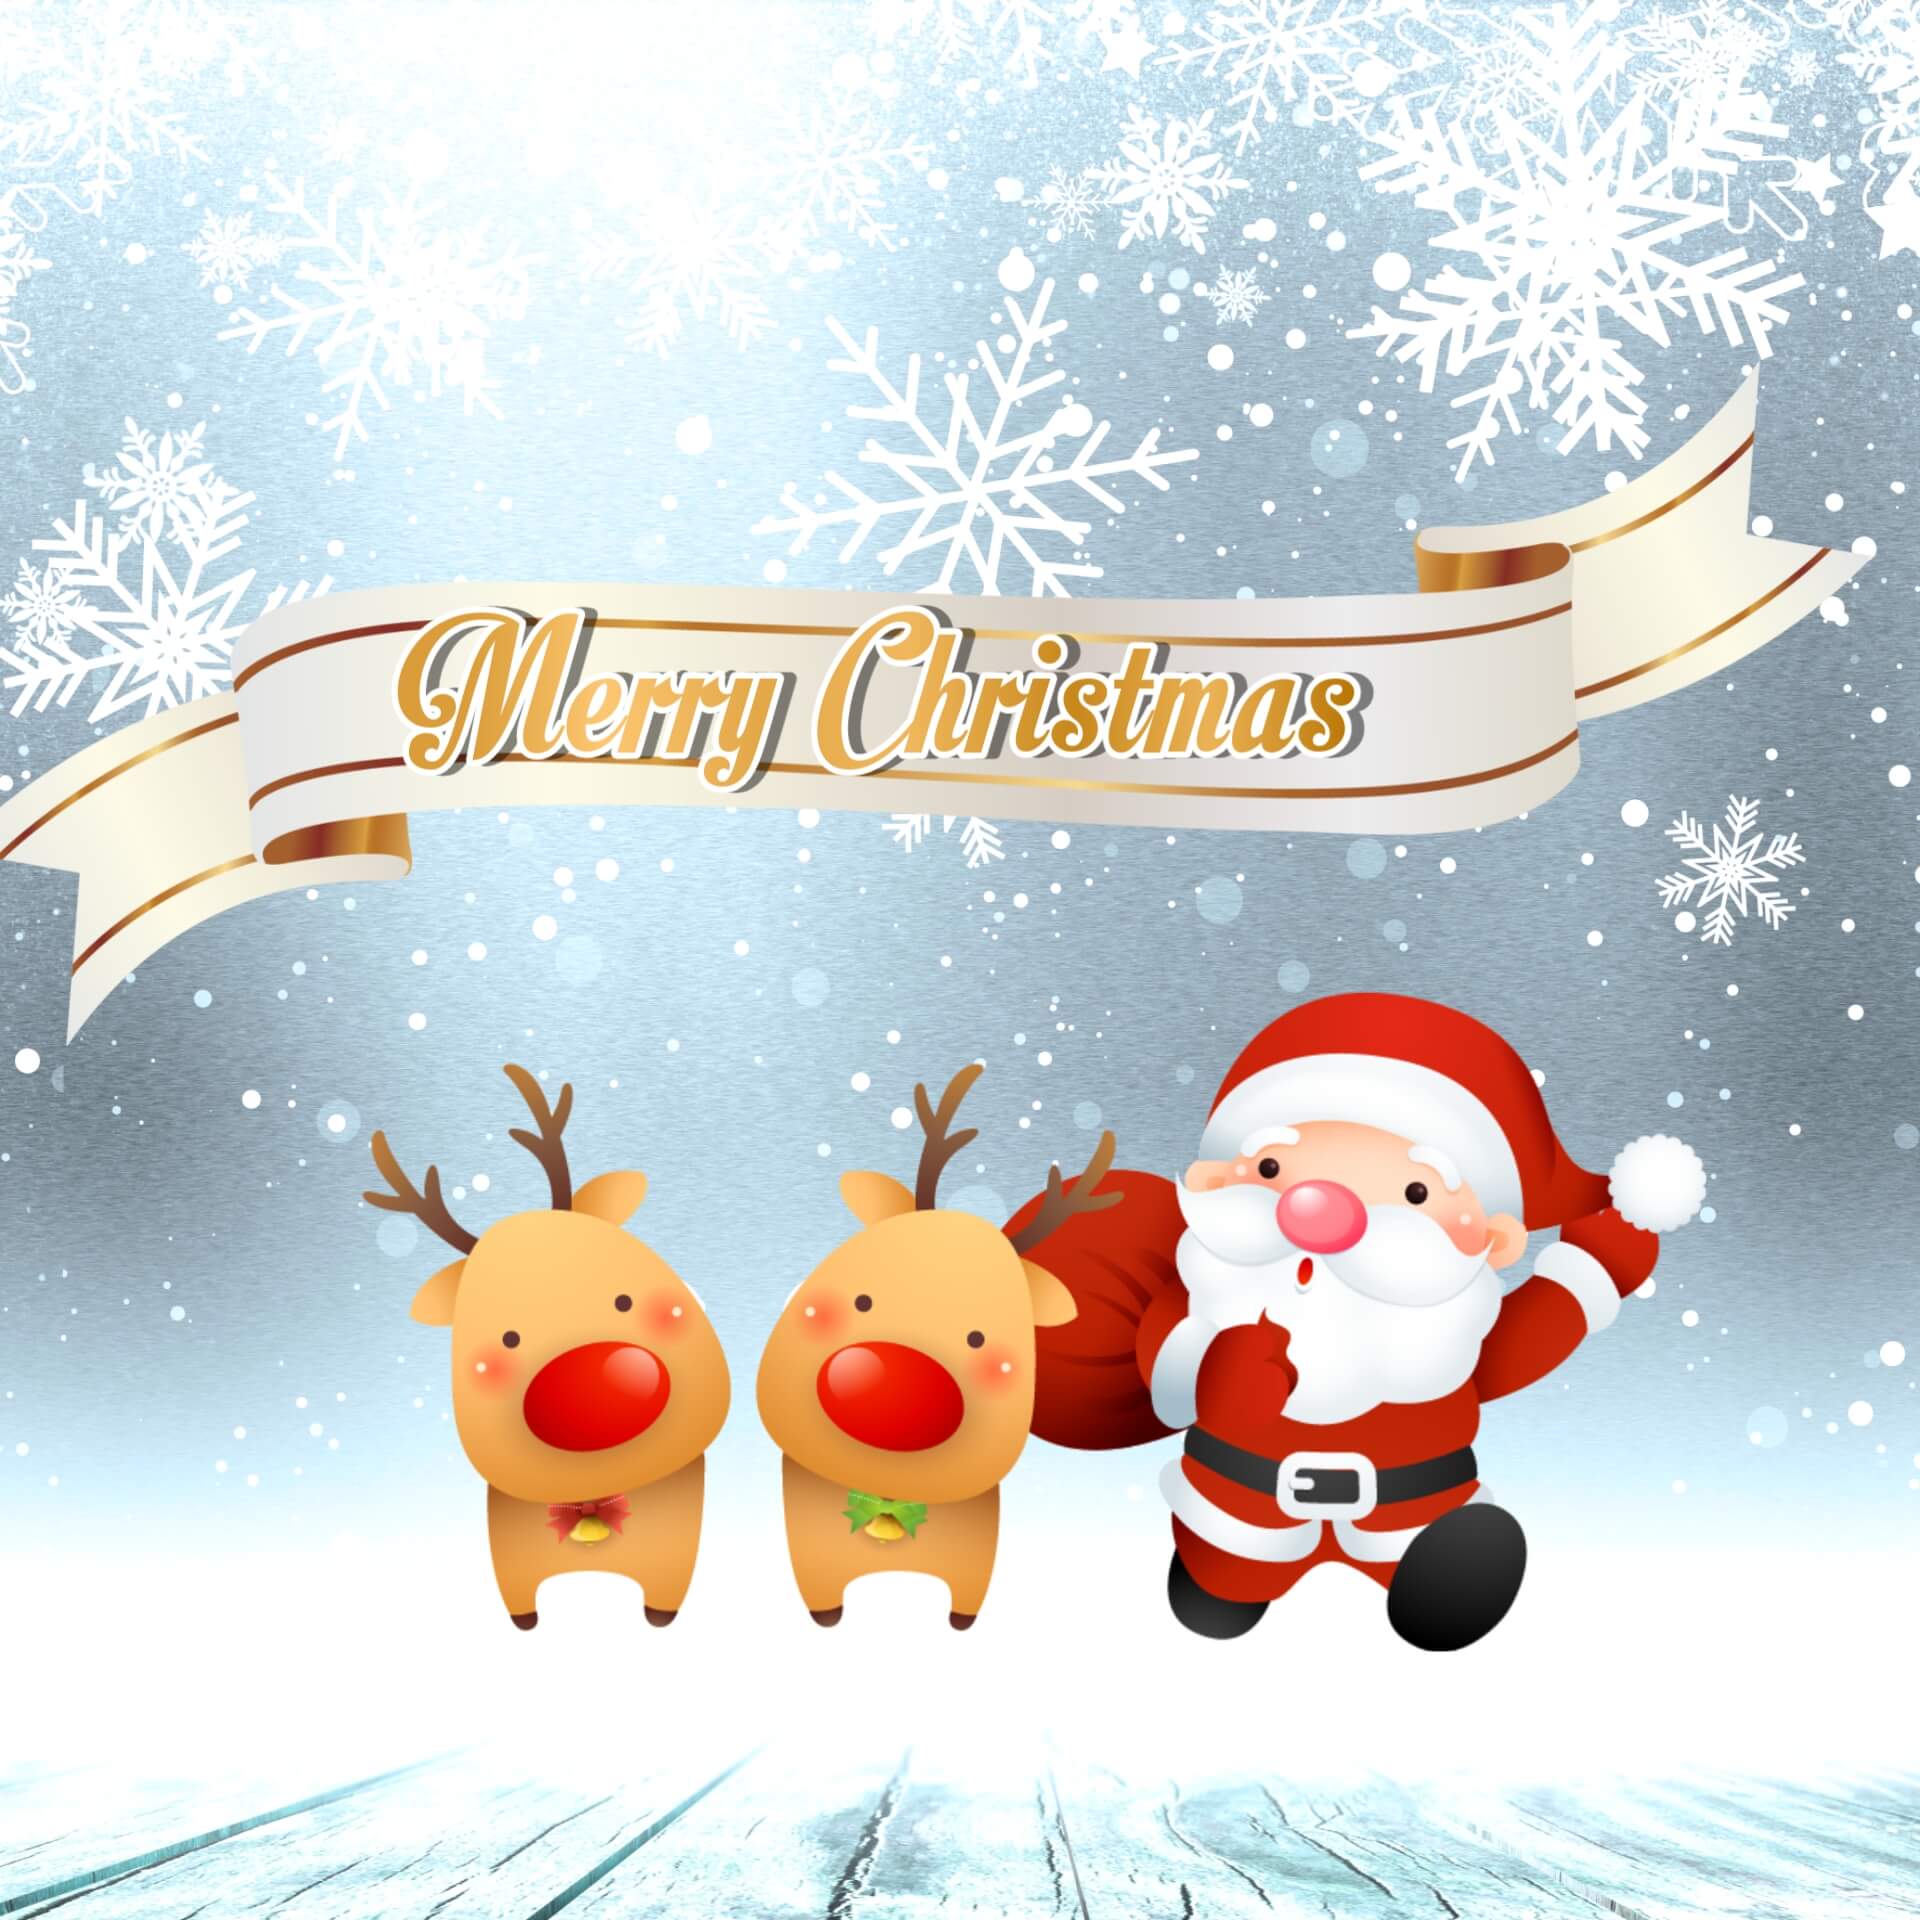 Happy Christmas Images